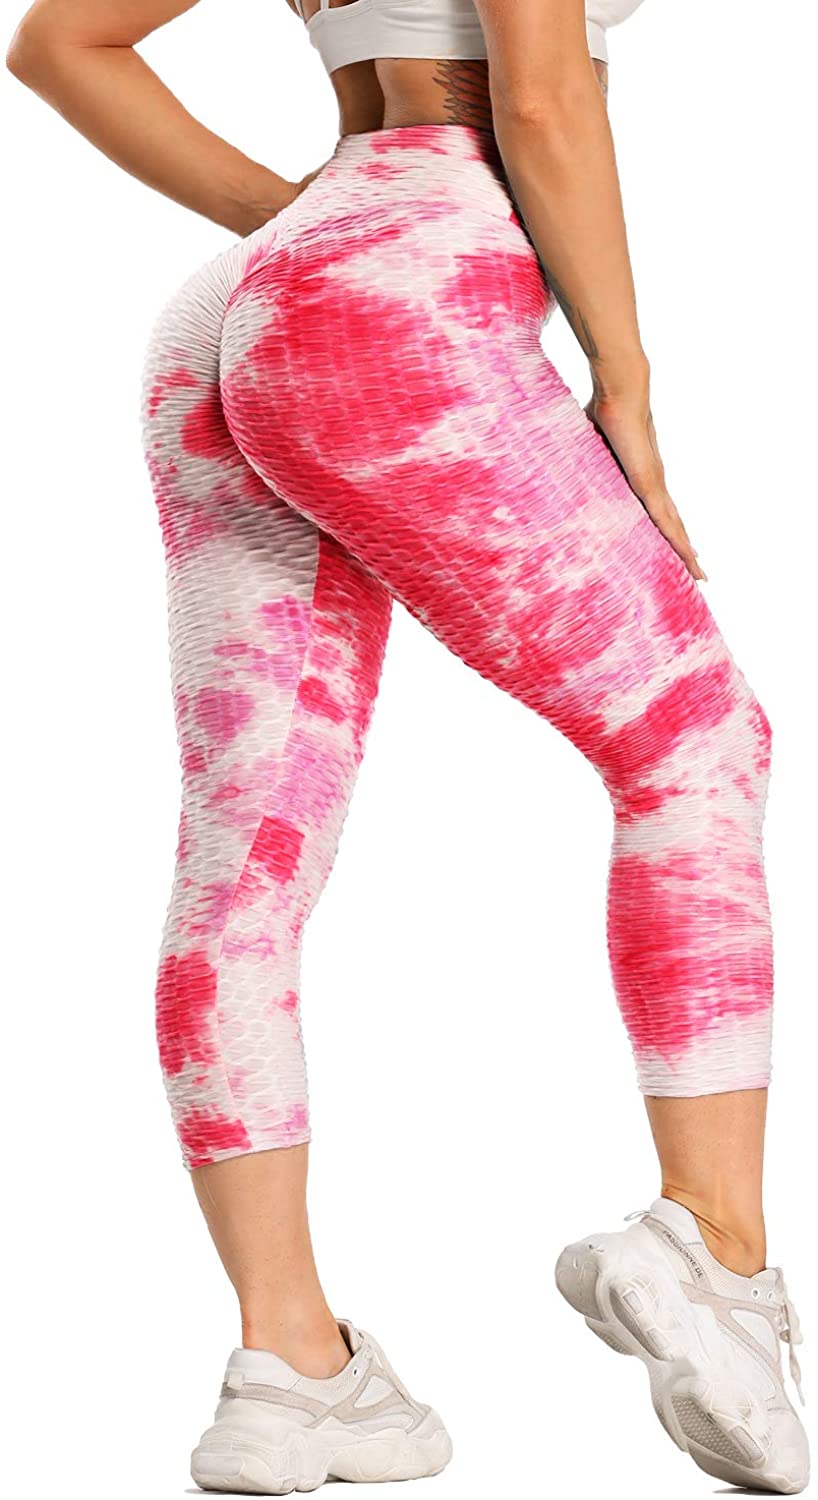 WHLBF Womens Plus Size Pant Ink Yoga Tie-Dye Pants Slim and Hip Lifting  Exercise Bottom Pants Hot Pink L(L)